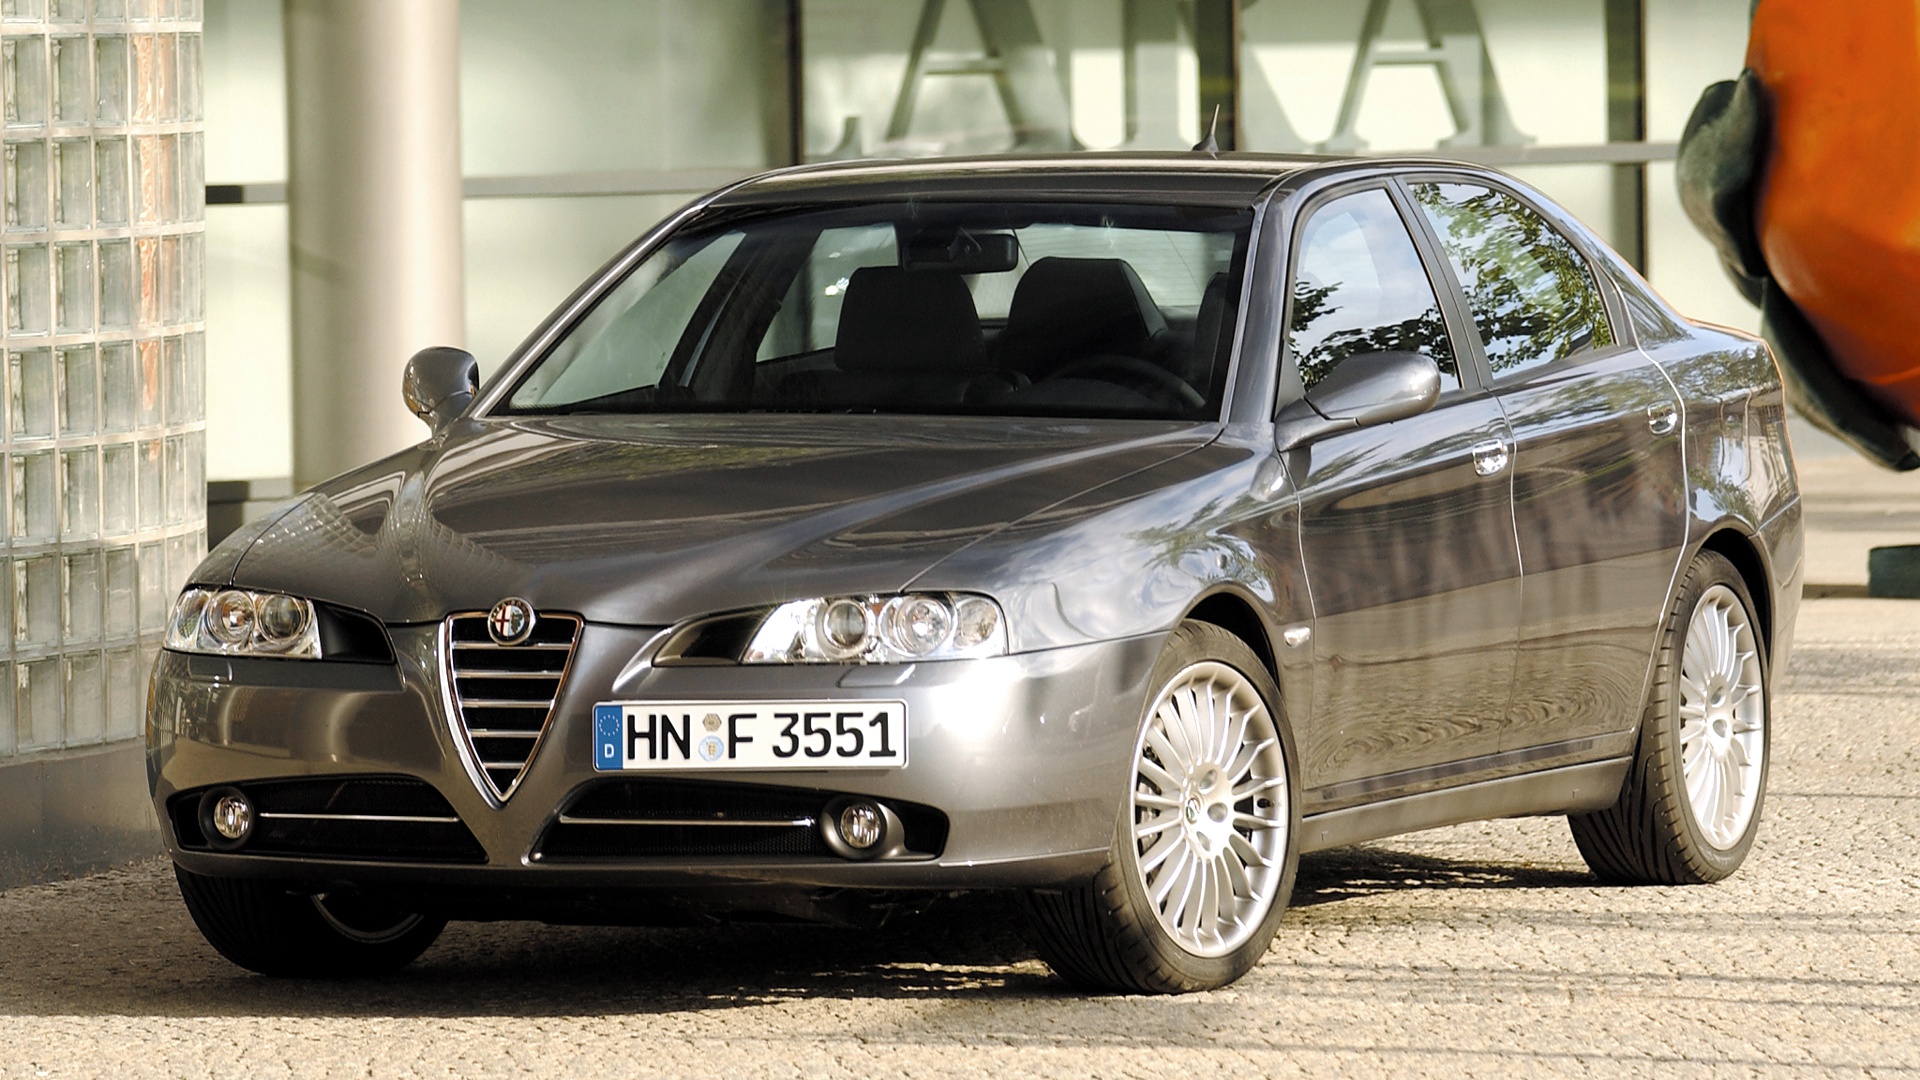 Alfa Romeo HD Wallpaper Background Cars Pictures And